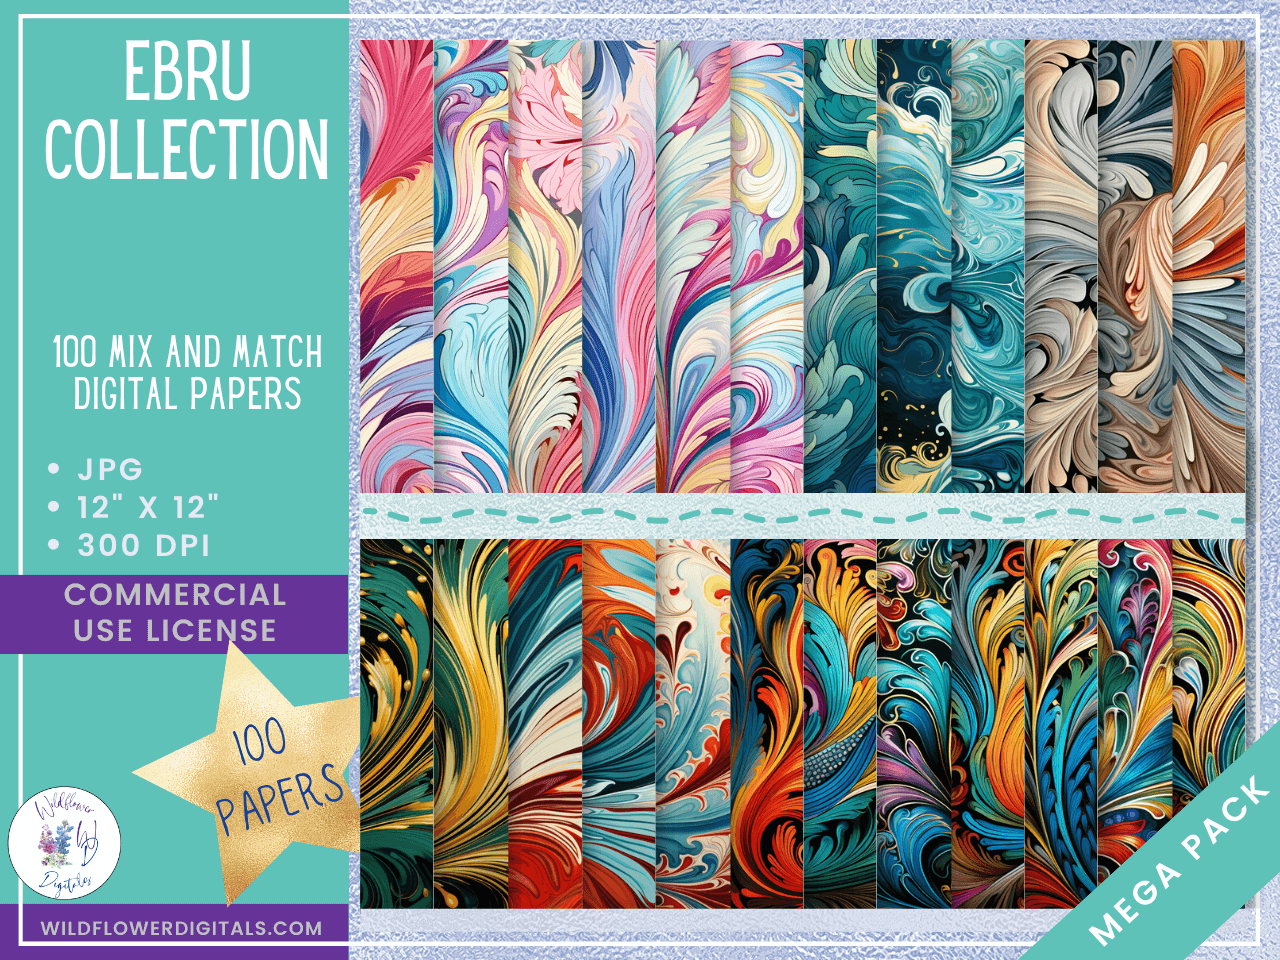 mockup of ebru collection digital papers mix and match papers